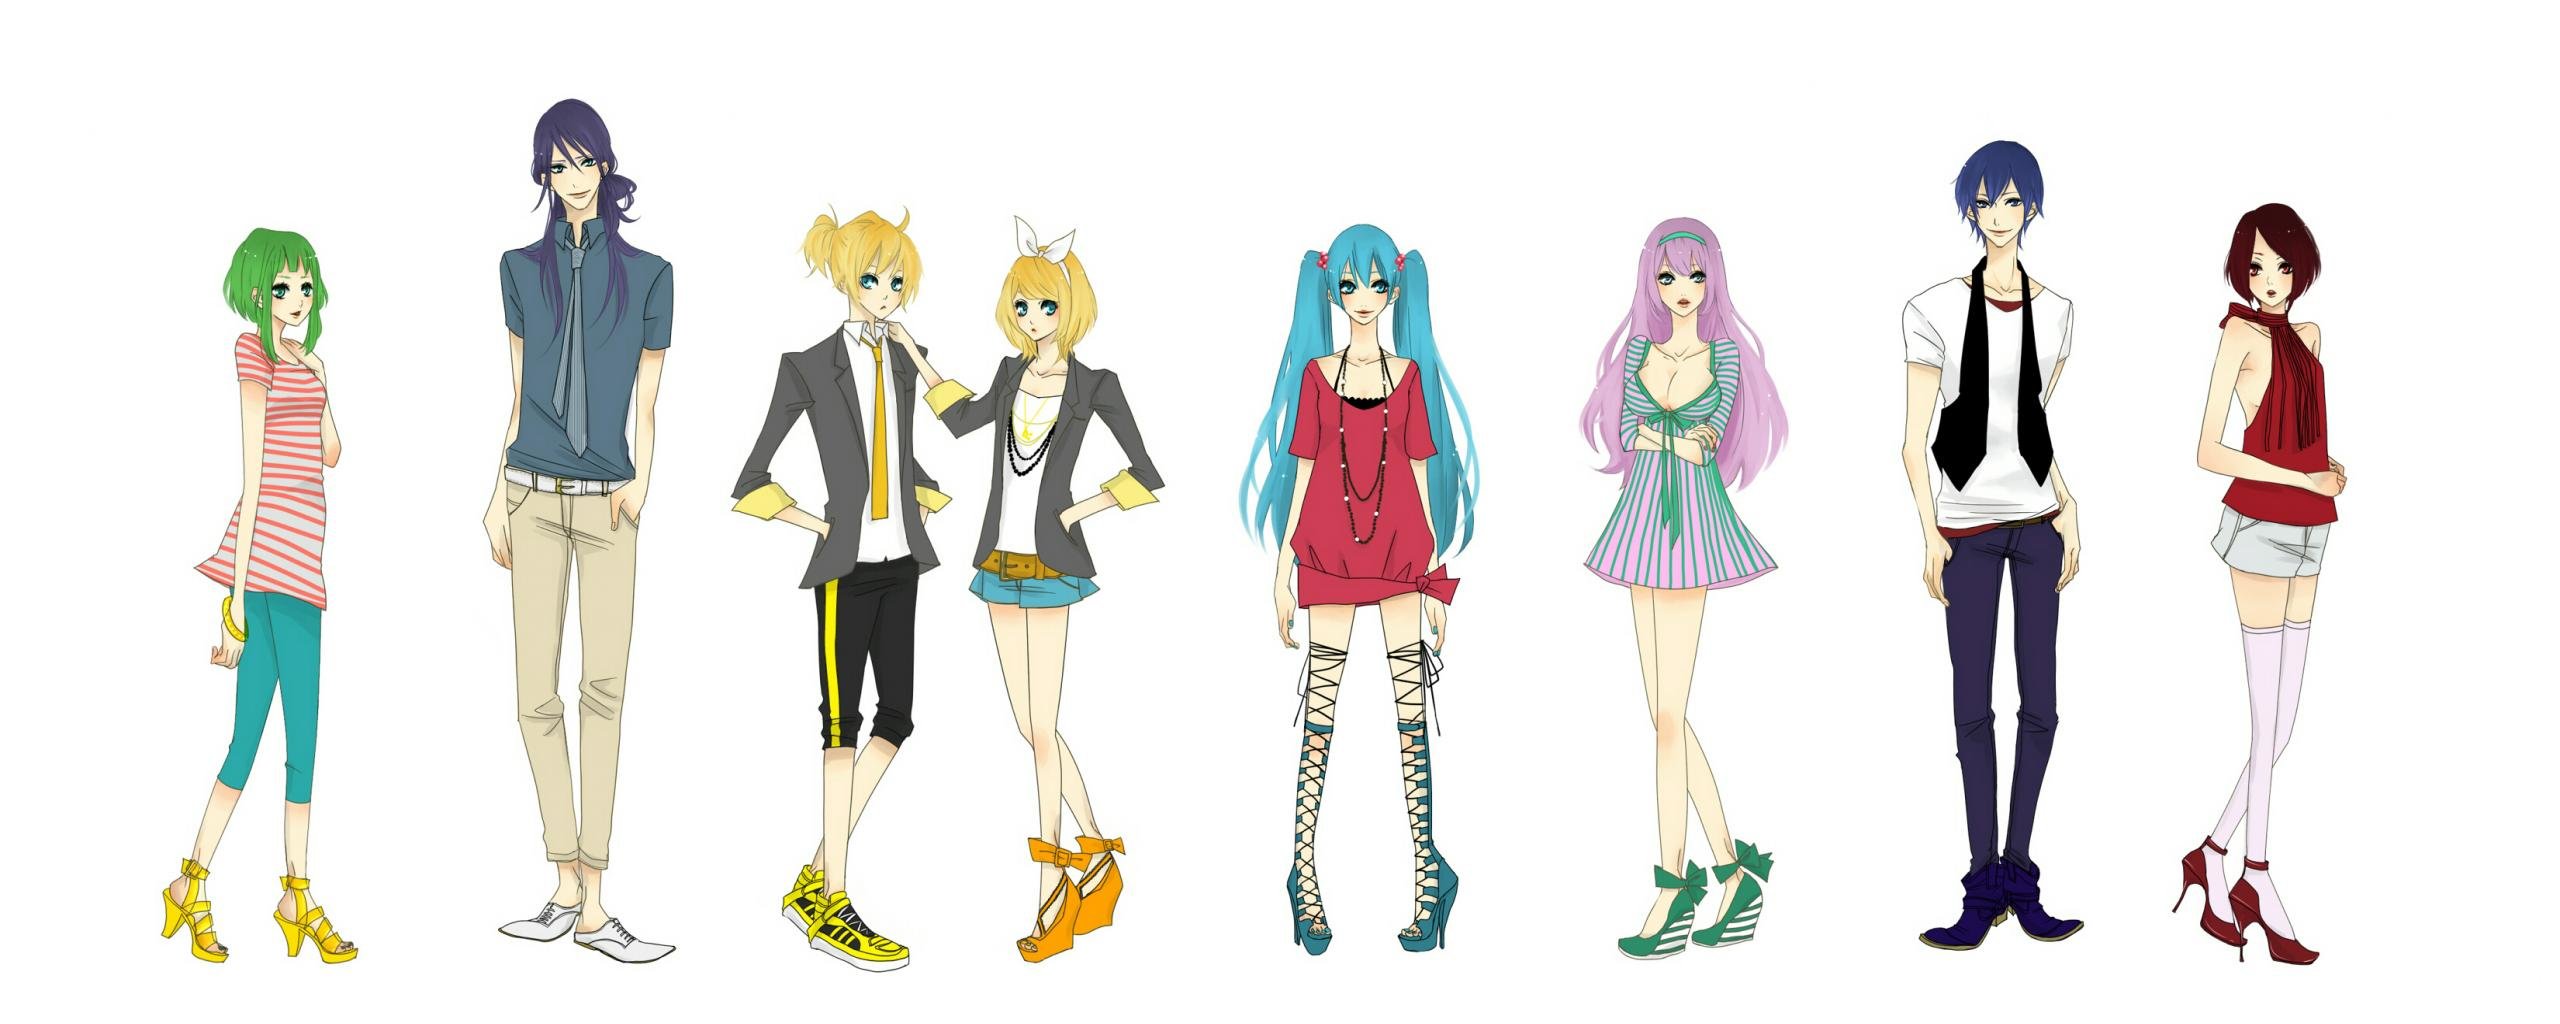 Download dual screen 2560x1024 Vocaloid desktop background ID:3323 for free